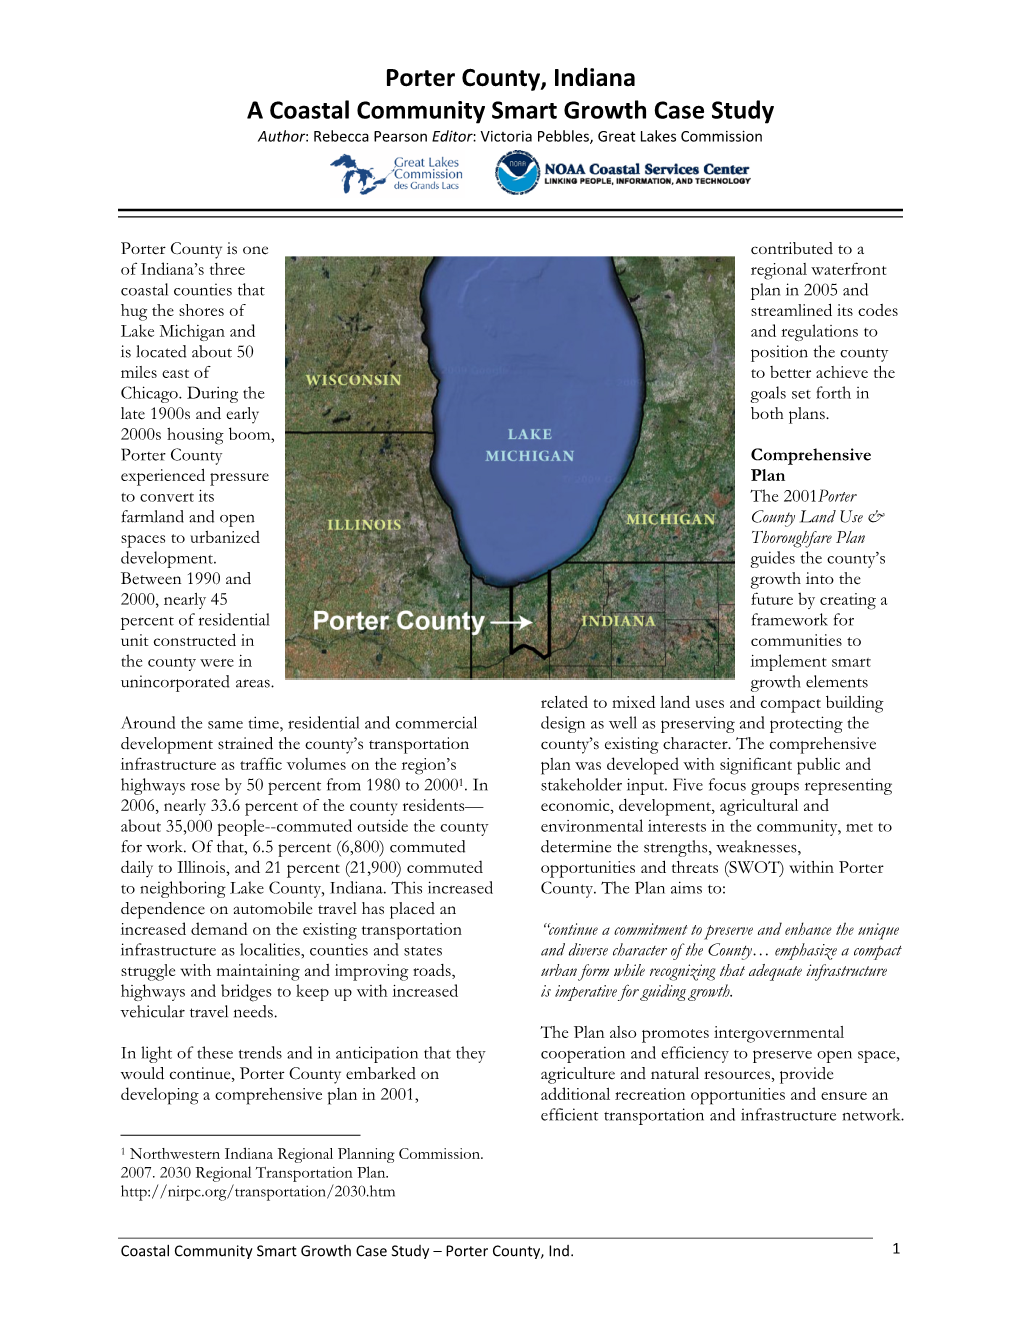 Porter County, Indiana a Coastal Community Smart Growth Case Study Author: Rebecca Pearson Editor: Victoria Pebbles, Great Lakes Commission